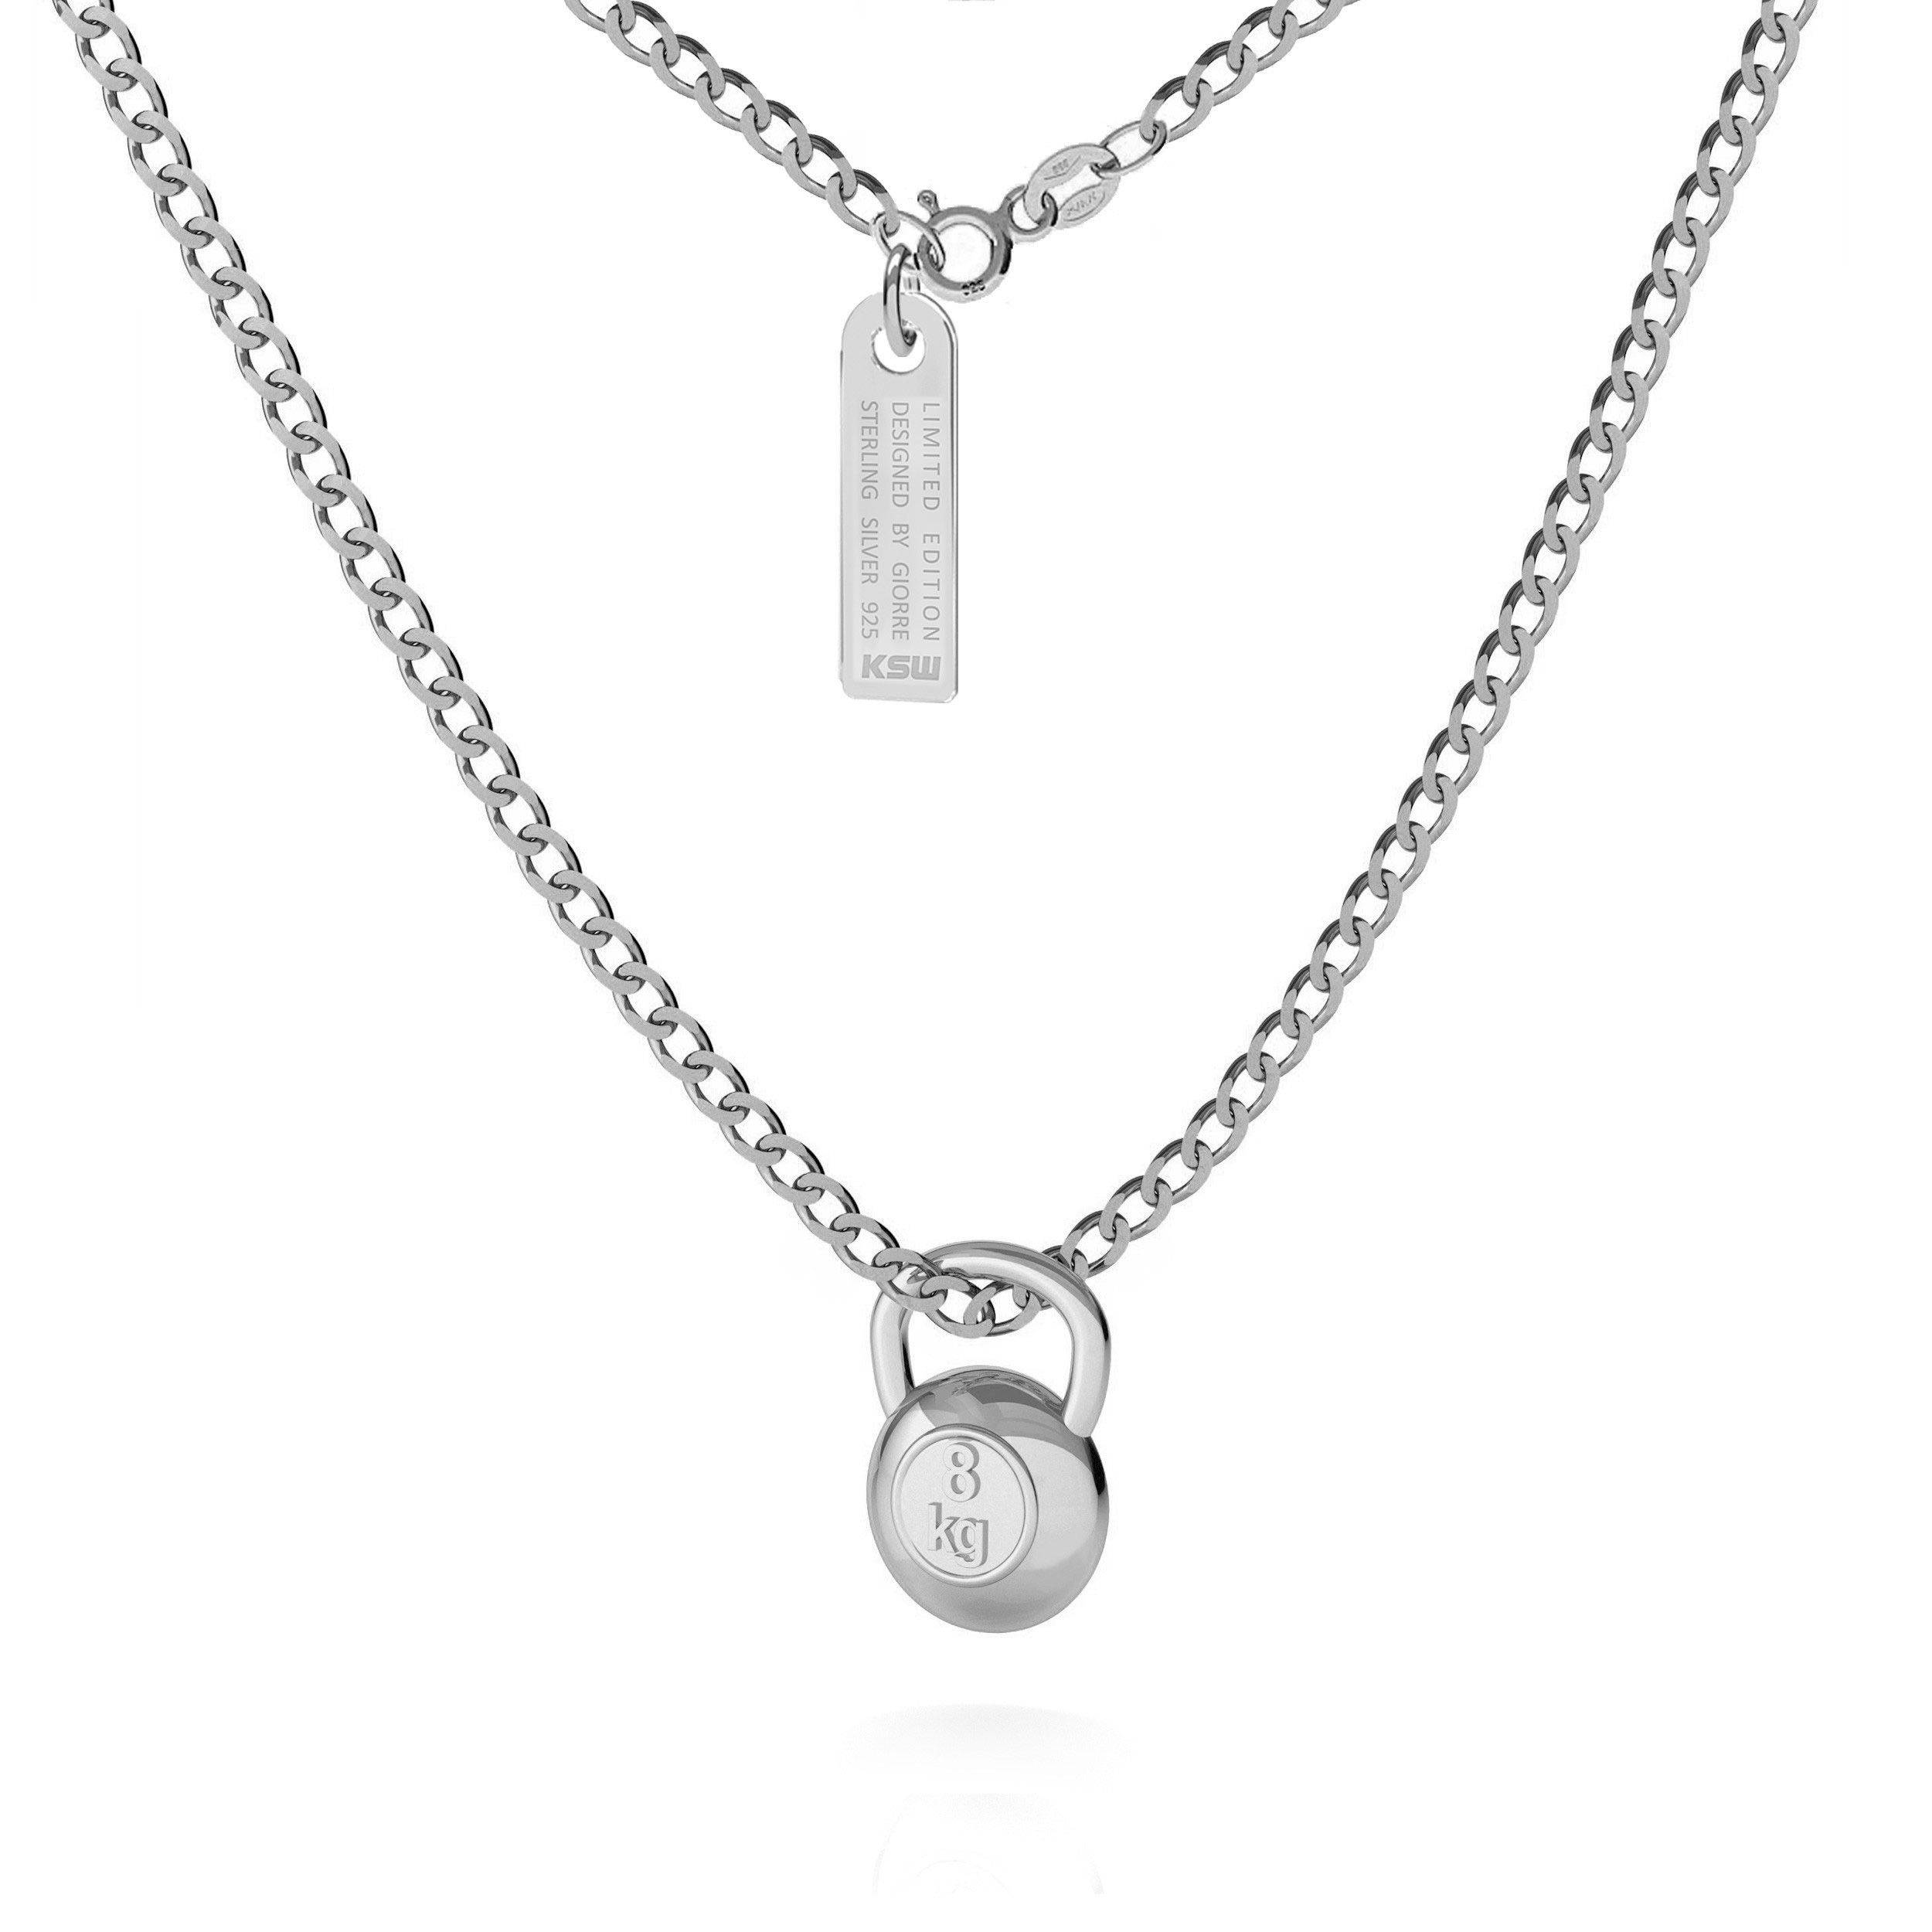 Necklace with kettlebell pendant, curb chain, silver 925